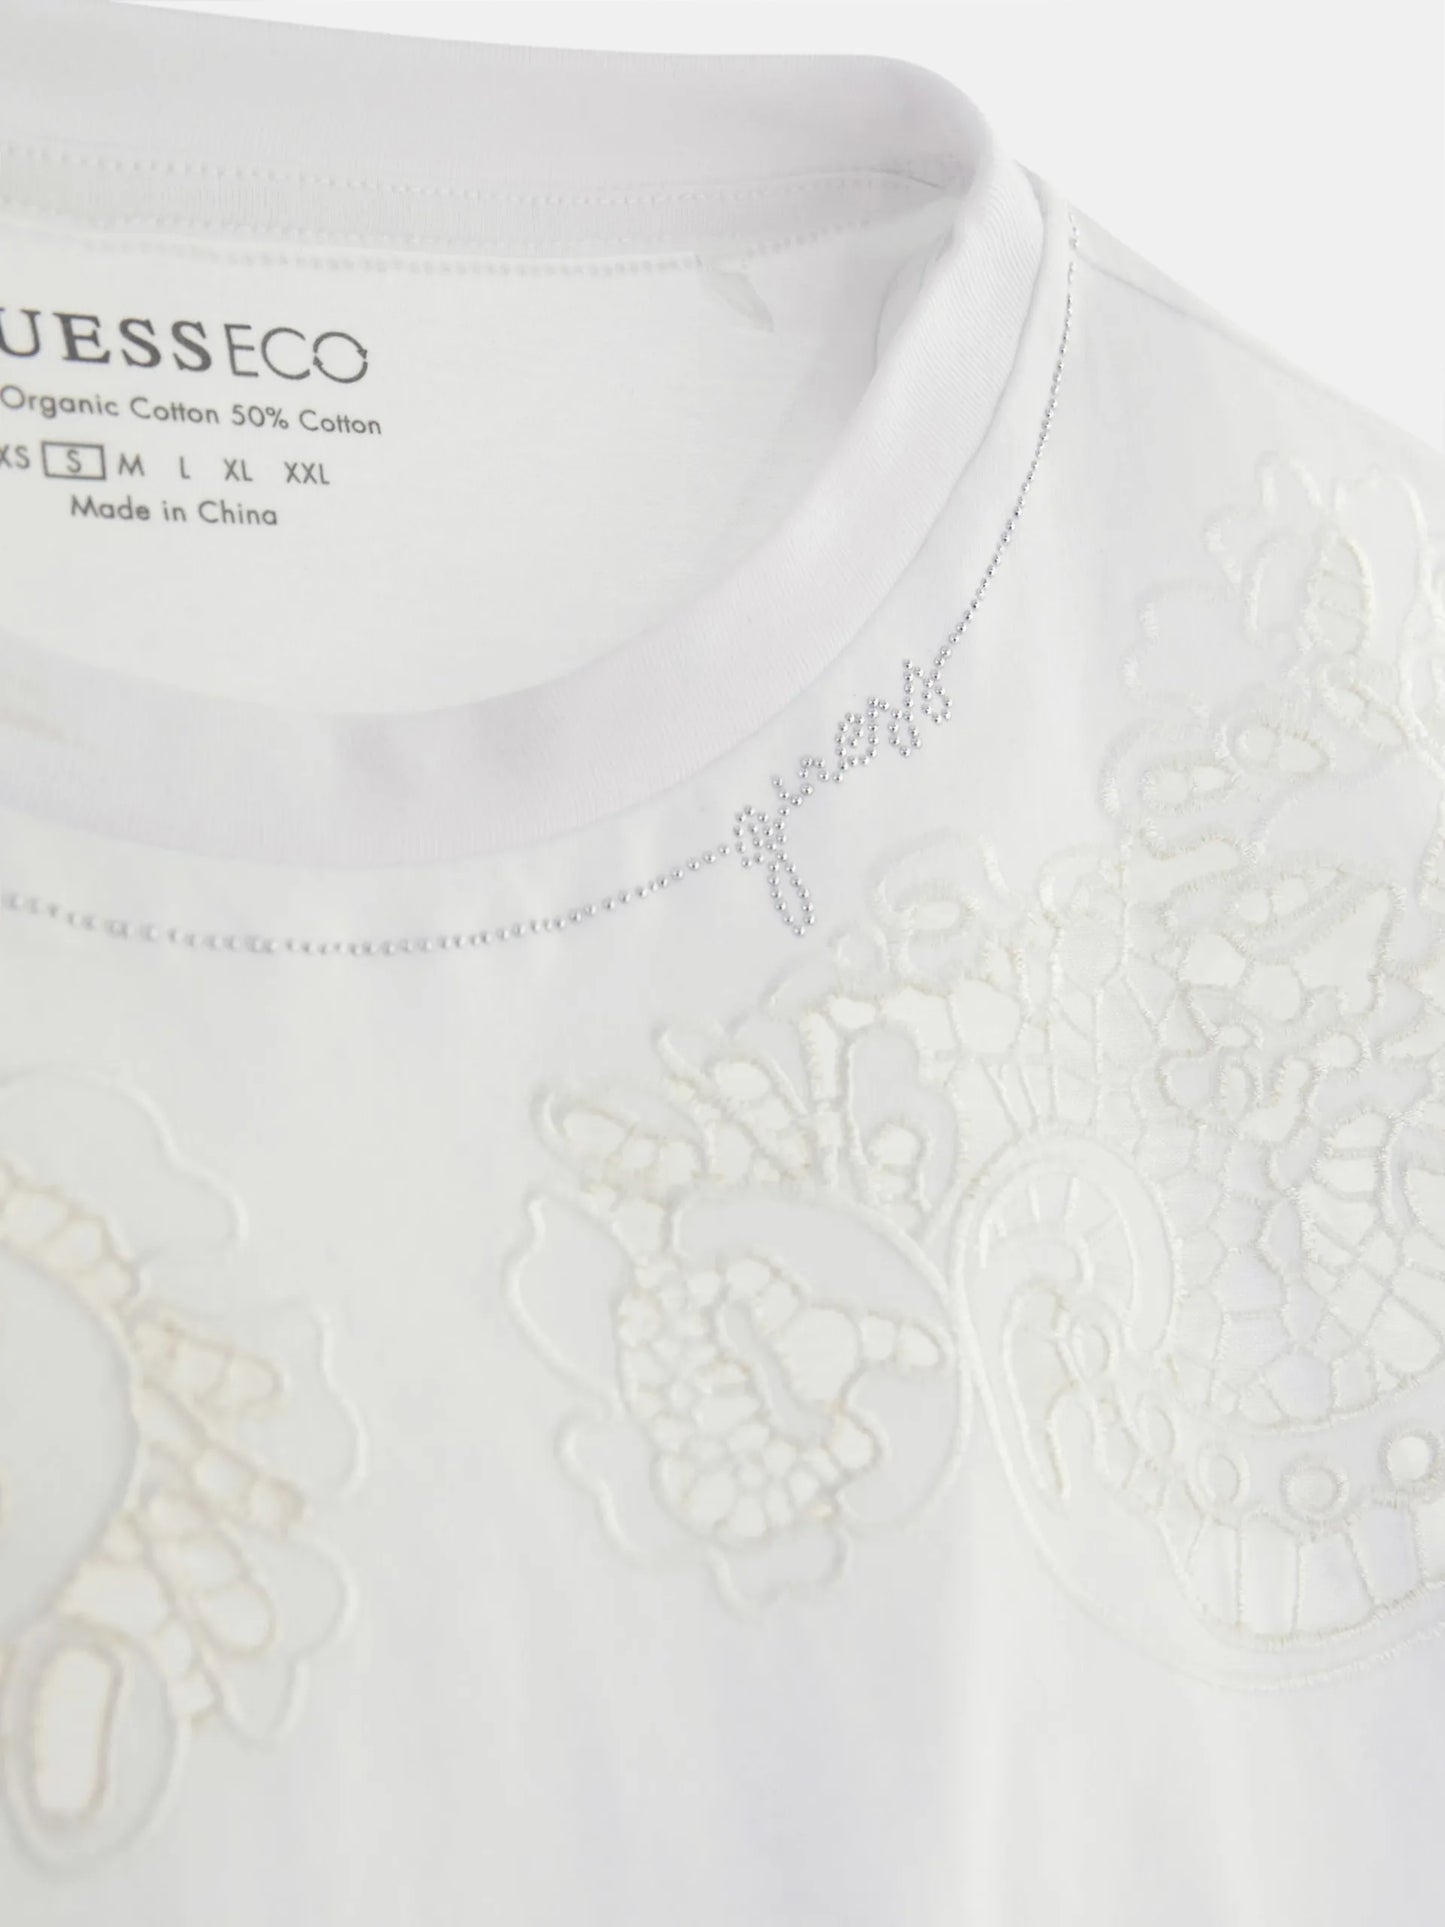 Guess Ajour Lace Tee - White